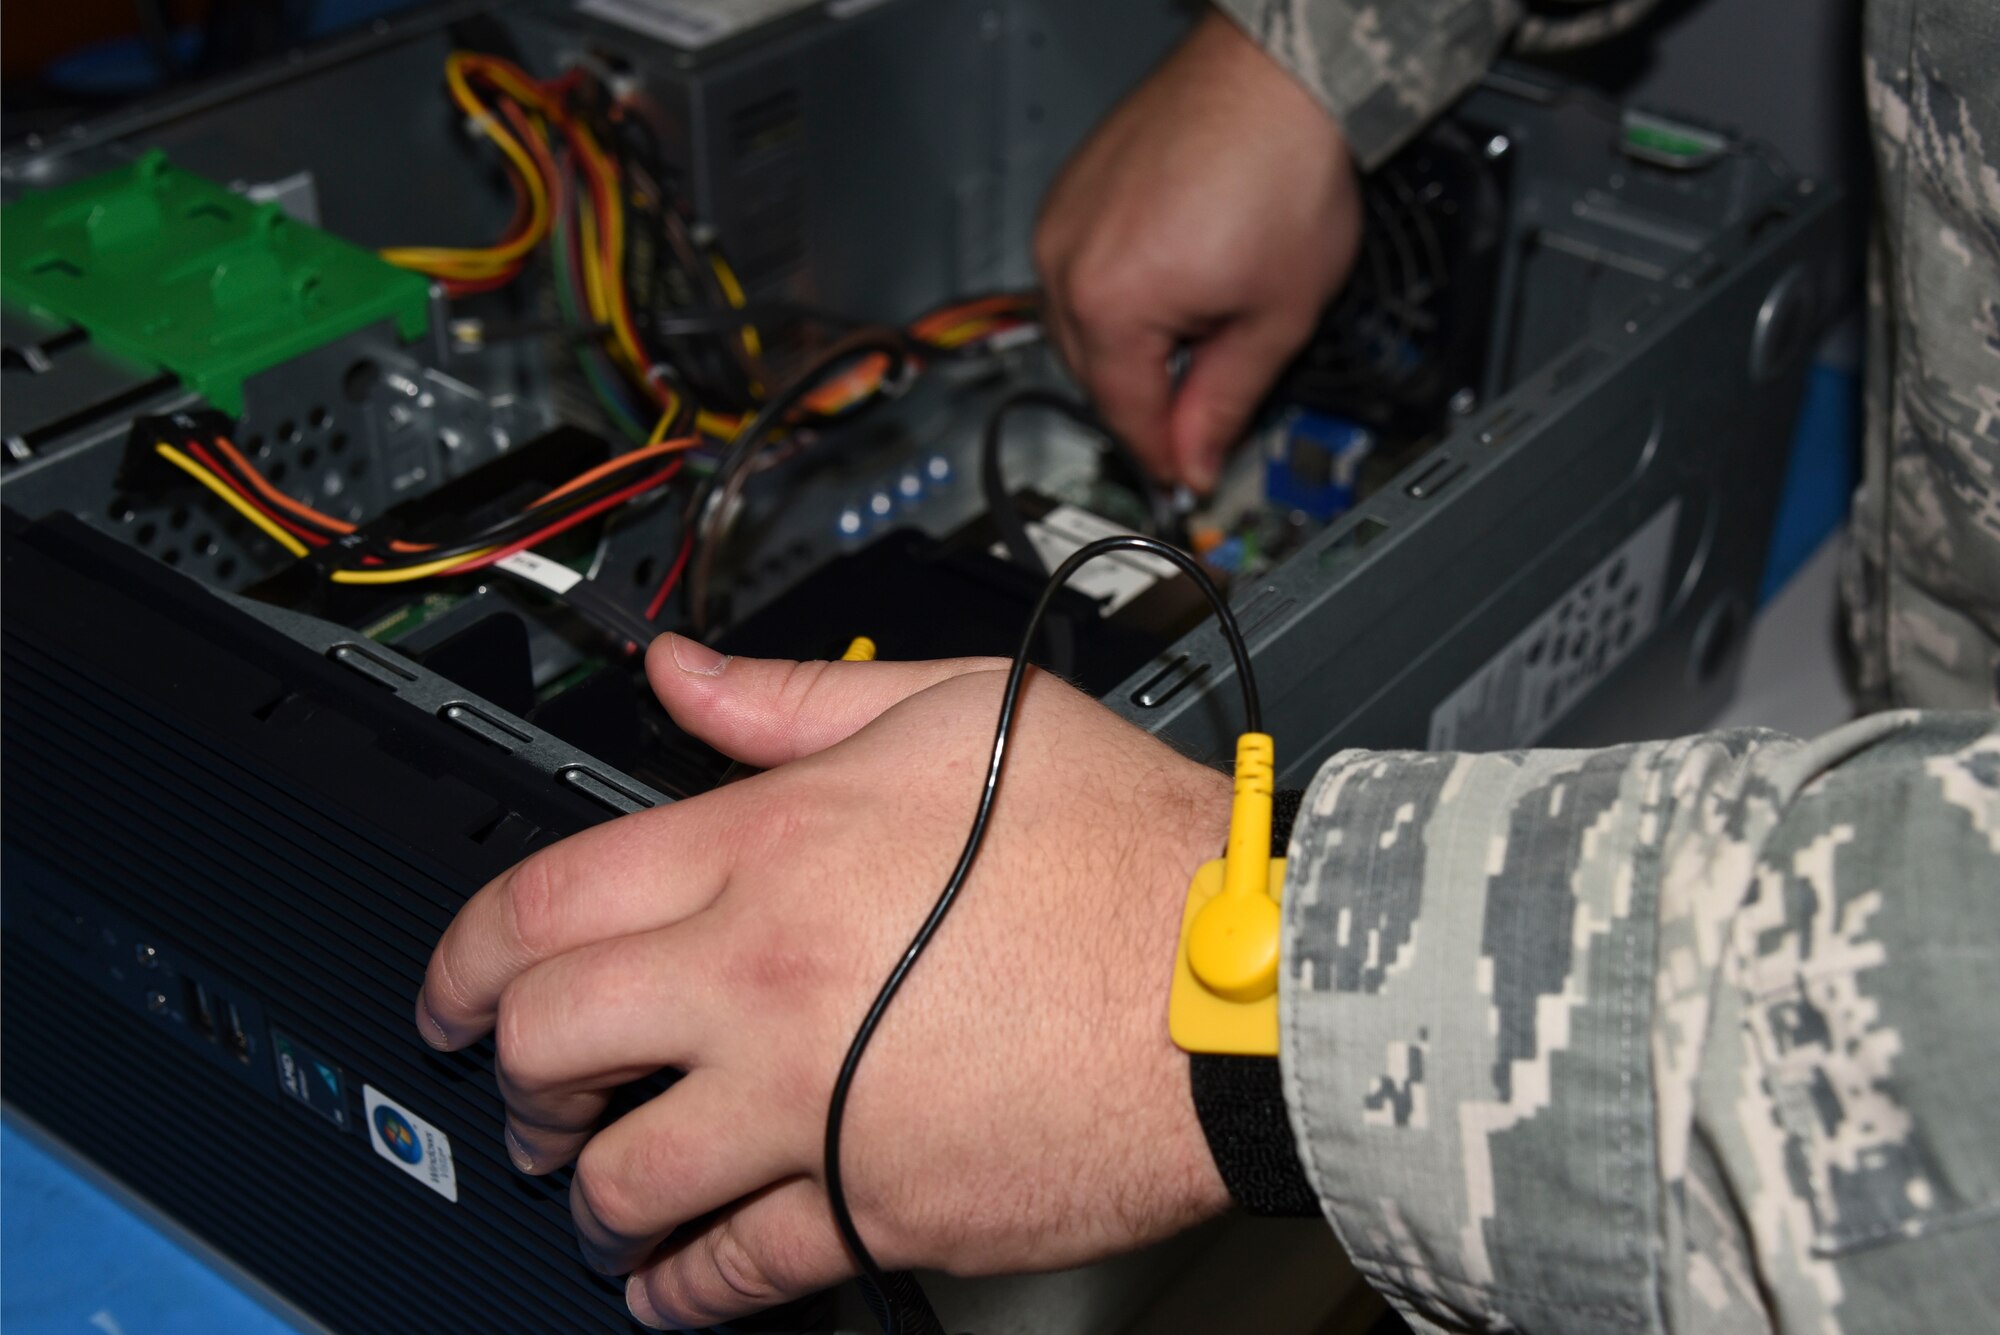 Senior Airman Bradly Stinger, 92nd Communications Squadron client systems team, wears a grounding strap while working on a damaged computer Oct. 29, 2015, at Fairchild Air Force Base, Wash. A grounding strap is used to prevent the buildup of static electricity on a person's body while working on a sensitive electronic equipment. (U.S. Air Force photo/Senior Airman Janelle Patiño)